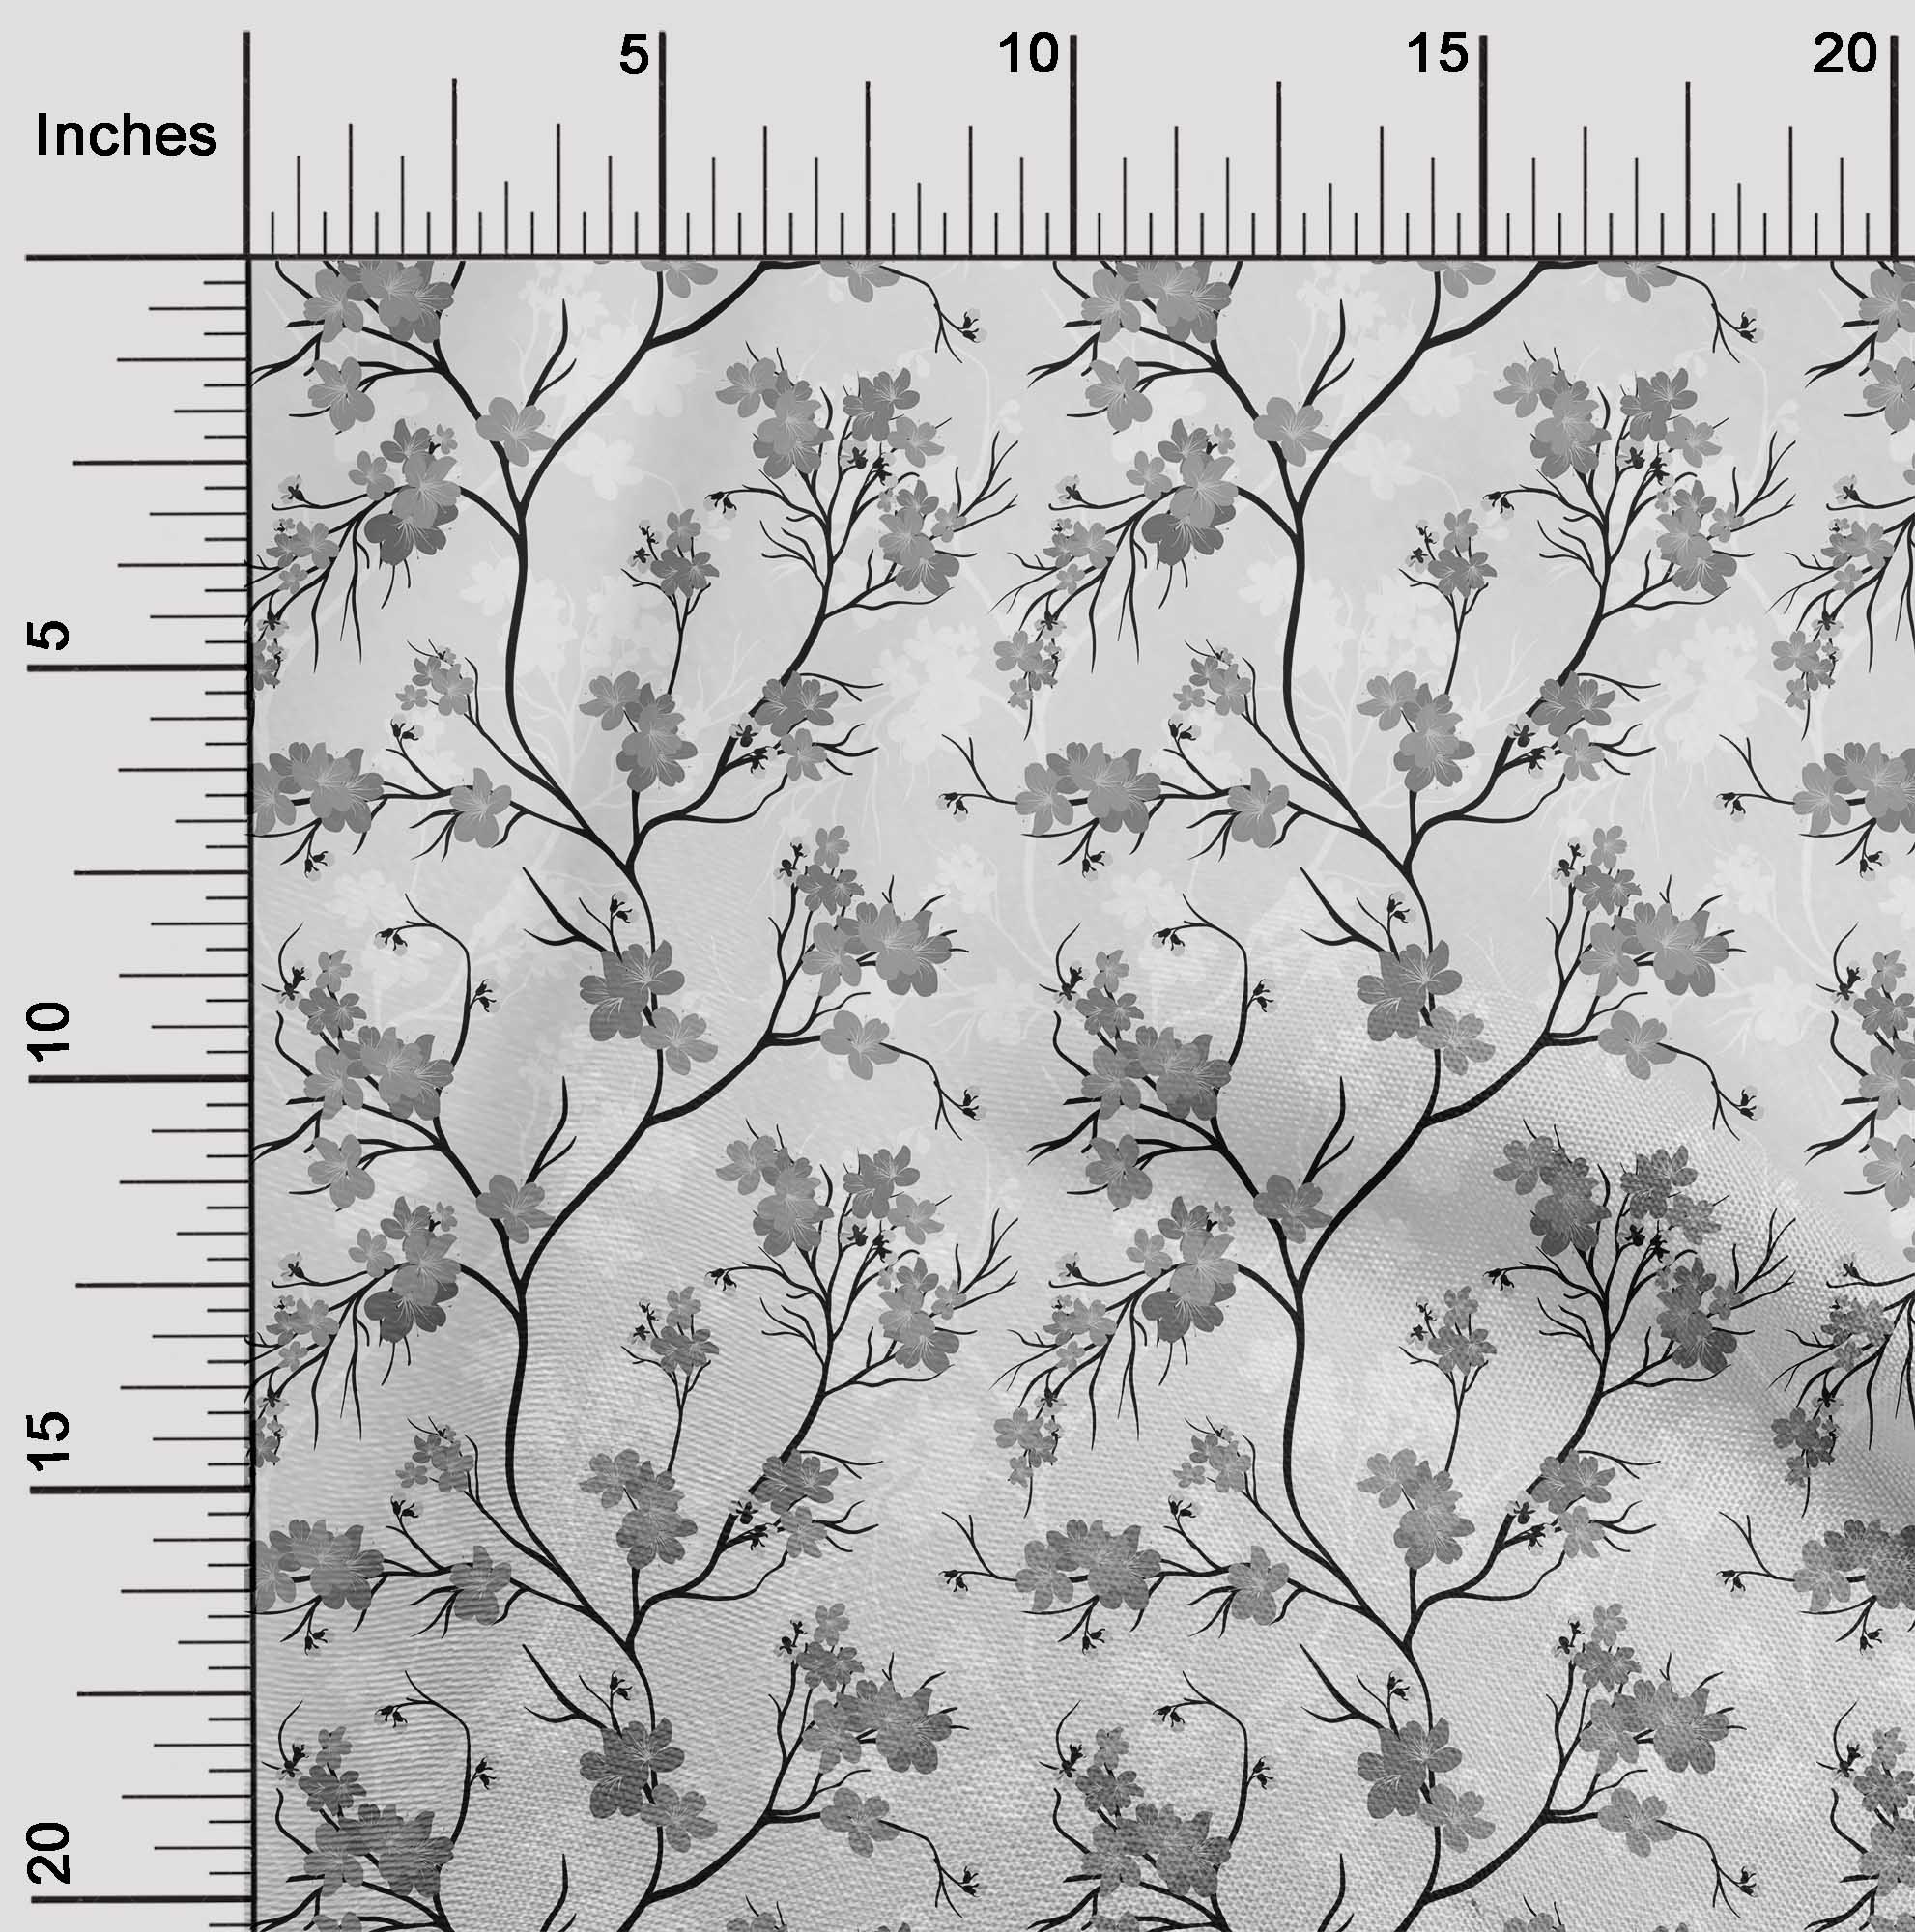 oneOone Polyester Spandex Gray Fabric Floral Sewing Material Print Fabric By The Yard 56 Inch Wide - image 2 of 5